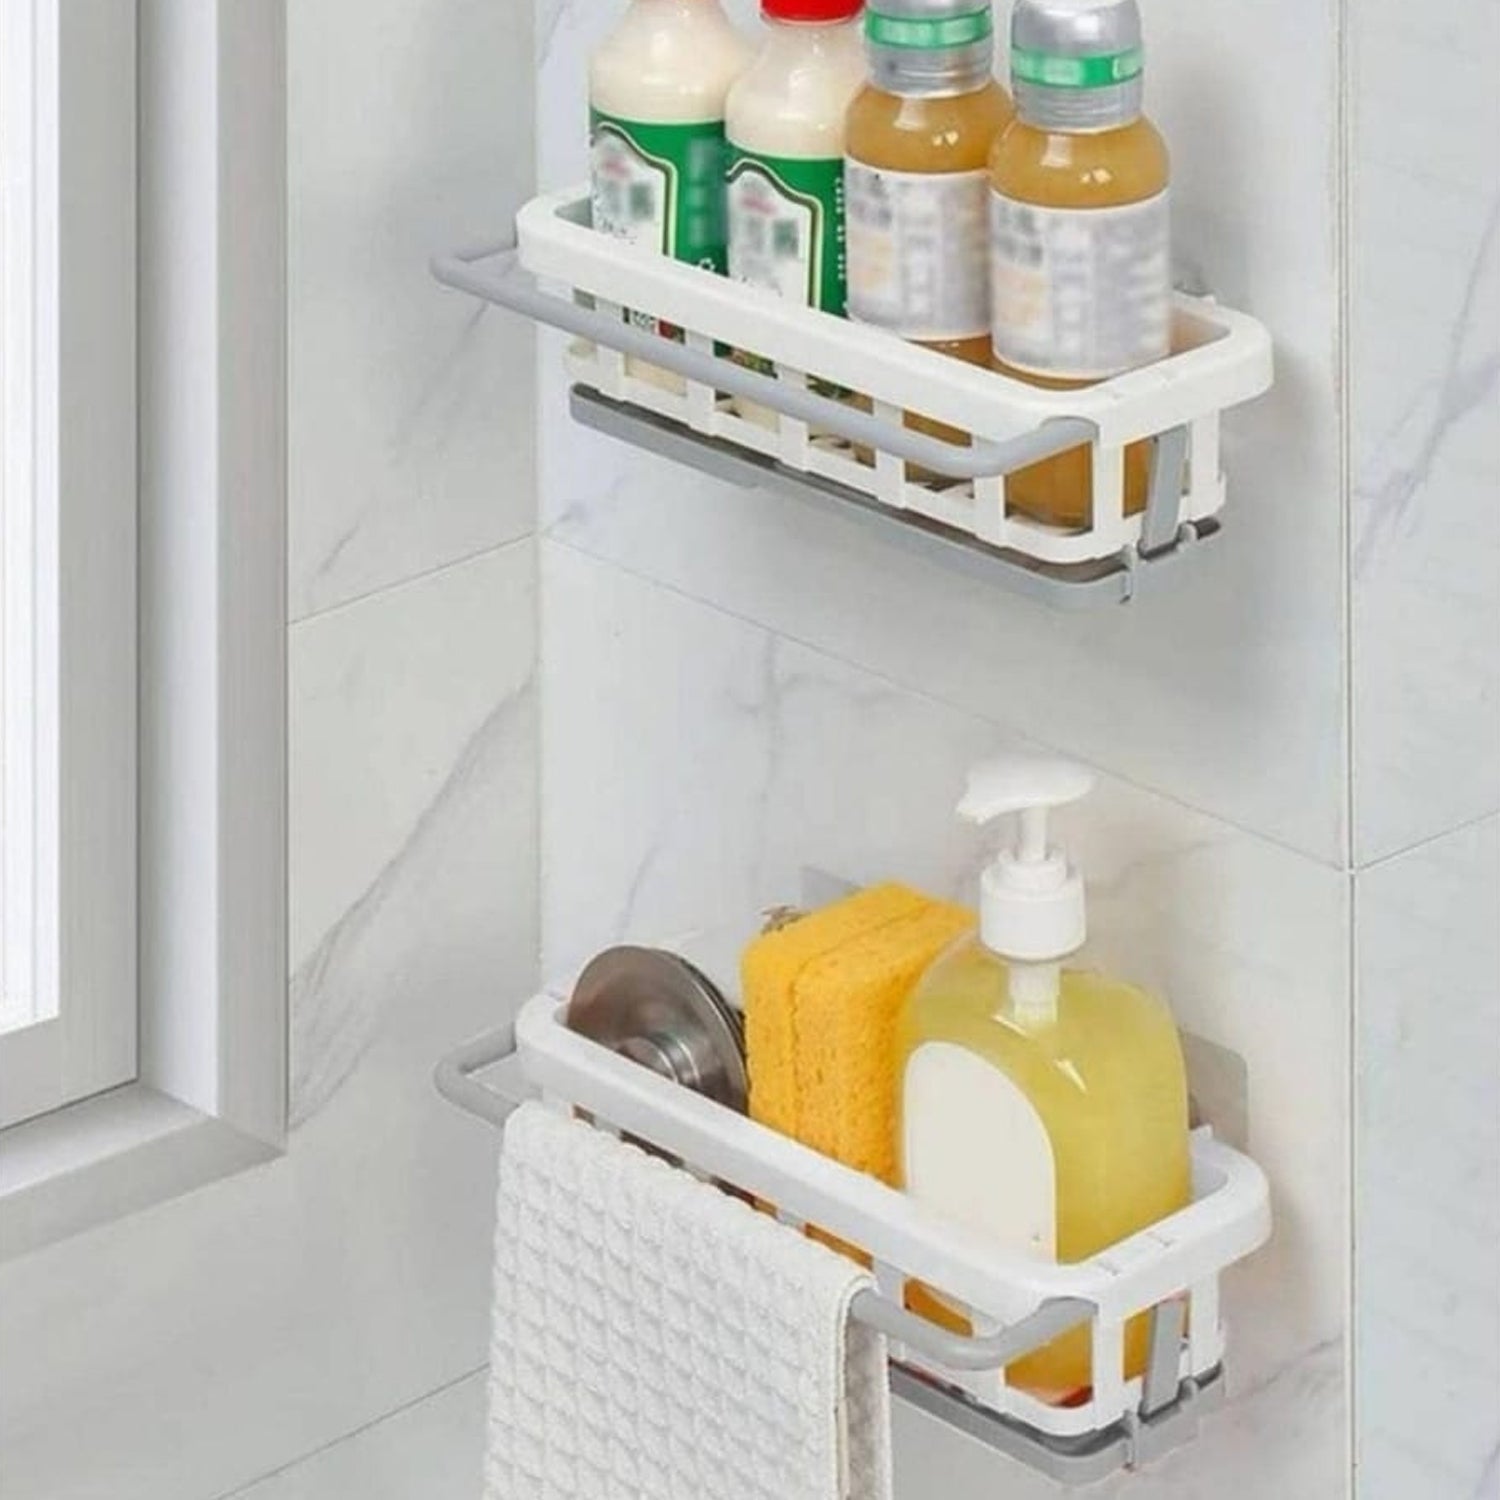 8788 Multipurpose Platic Hanging Drain Rack Retractable Sponge Storage Hanging Rack With Adhesive Hook for Kitchen and Bathroom Dishcloth Holders Basket Drying Tray Organizer